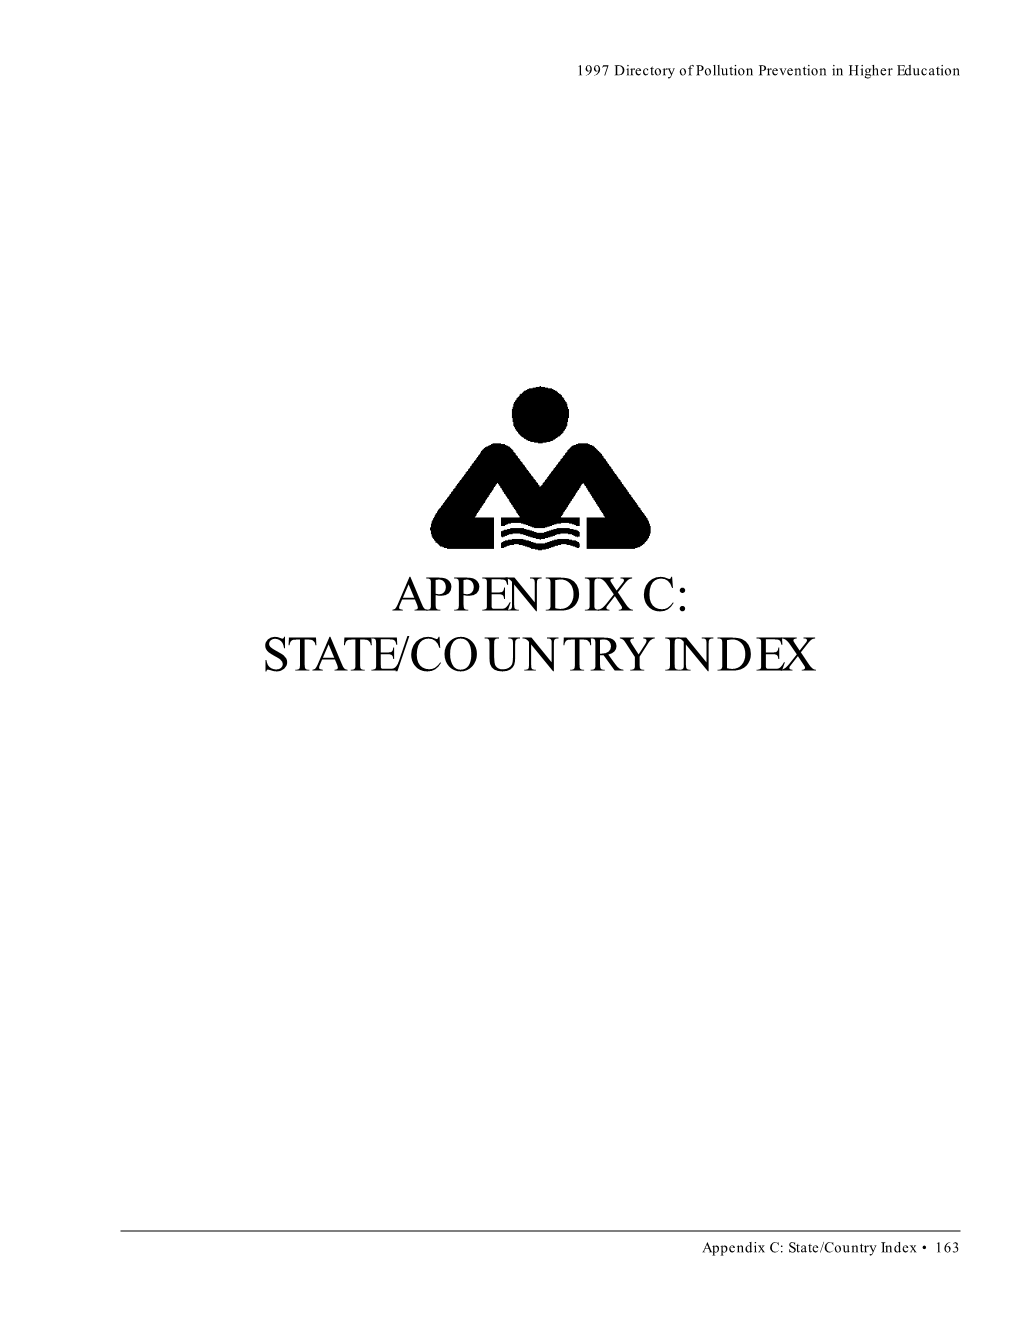 Appendix C: State/Country Index